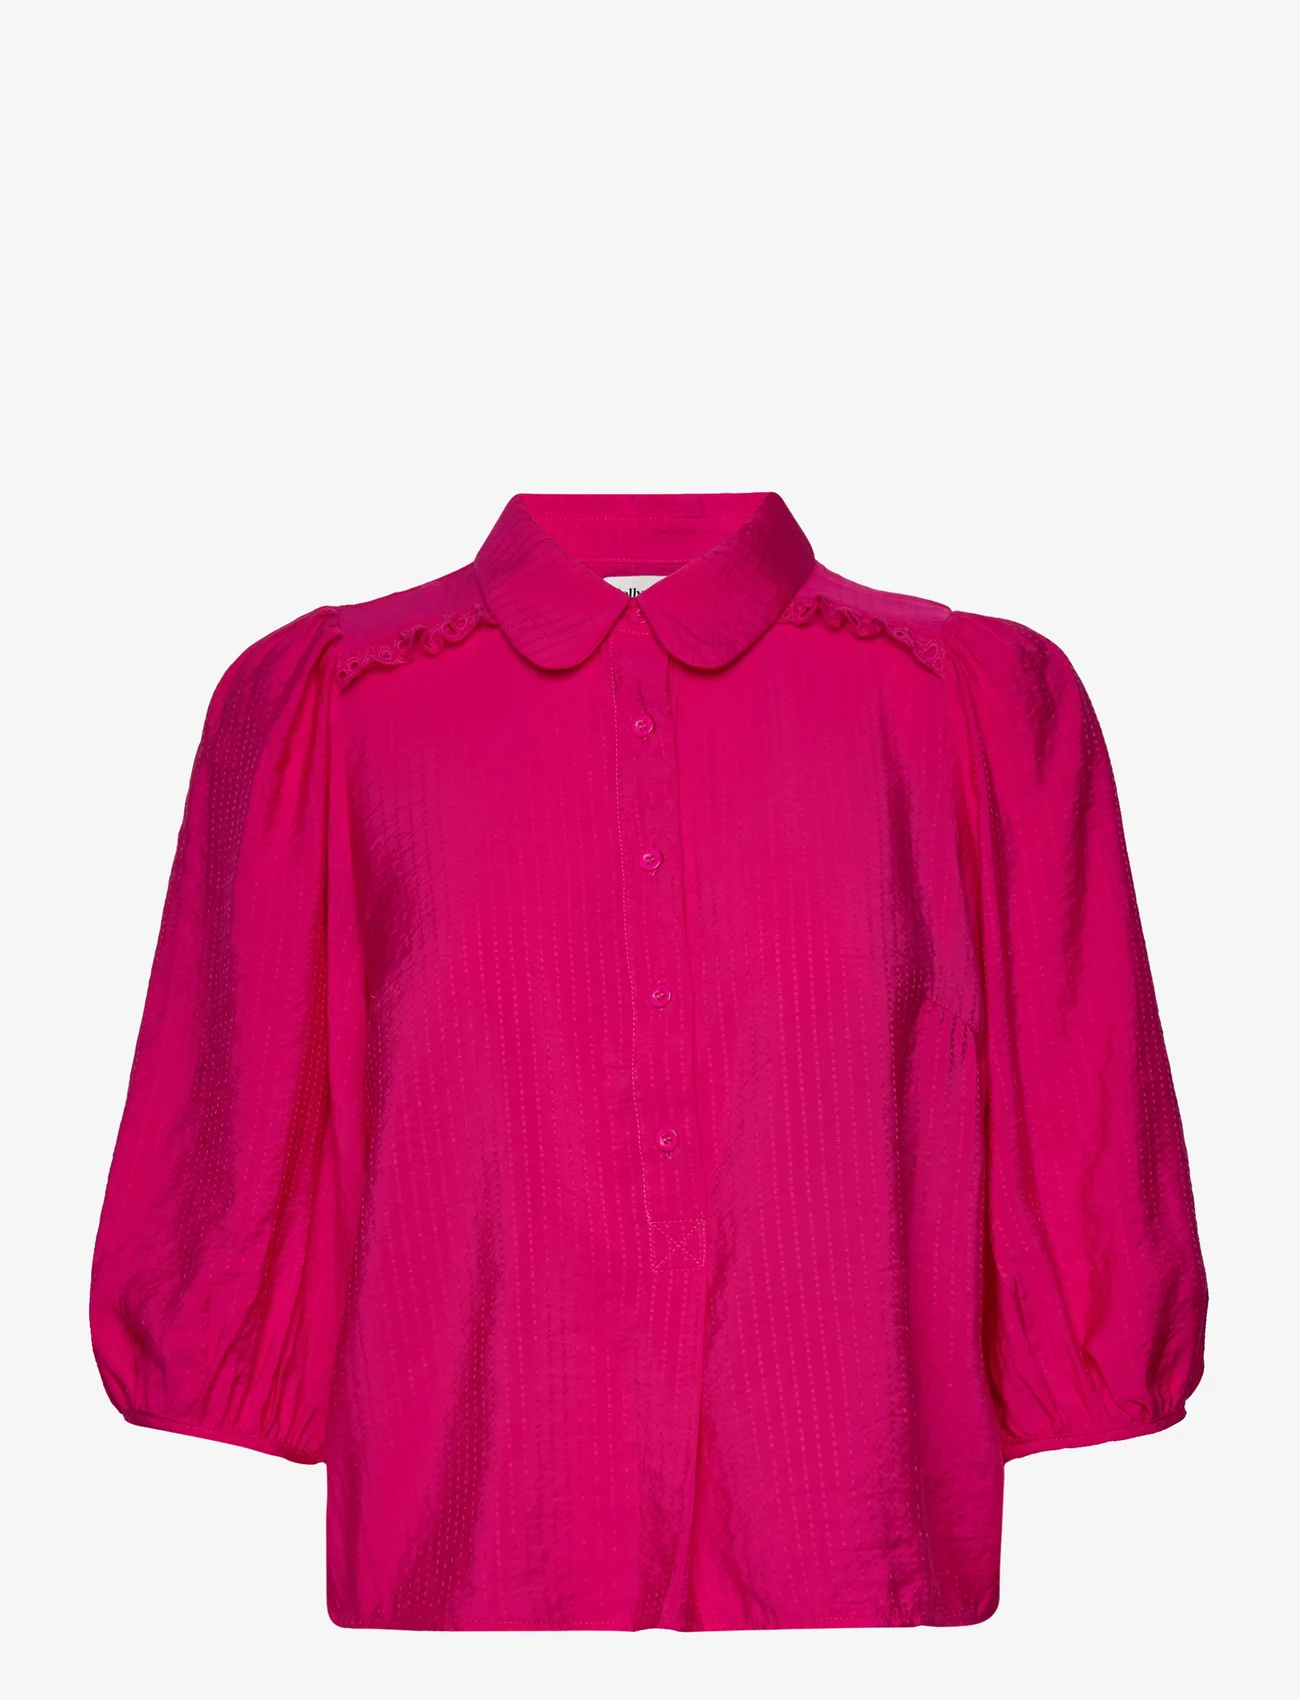 Lollys Laundry - Tunis Shirt - 51 pink - 0